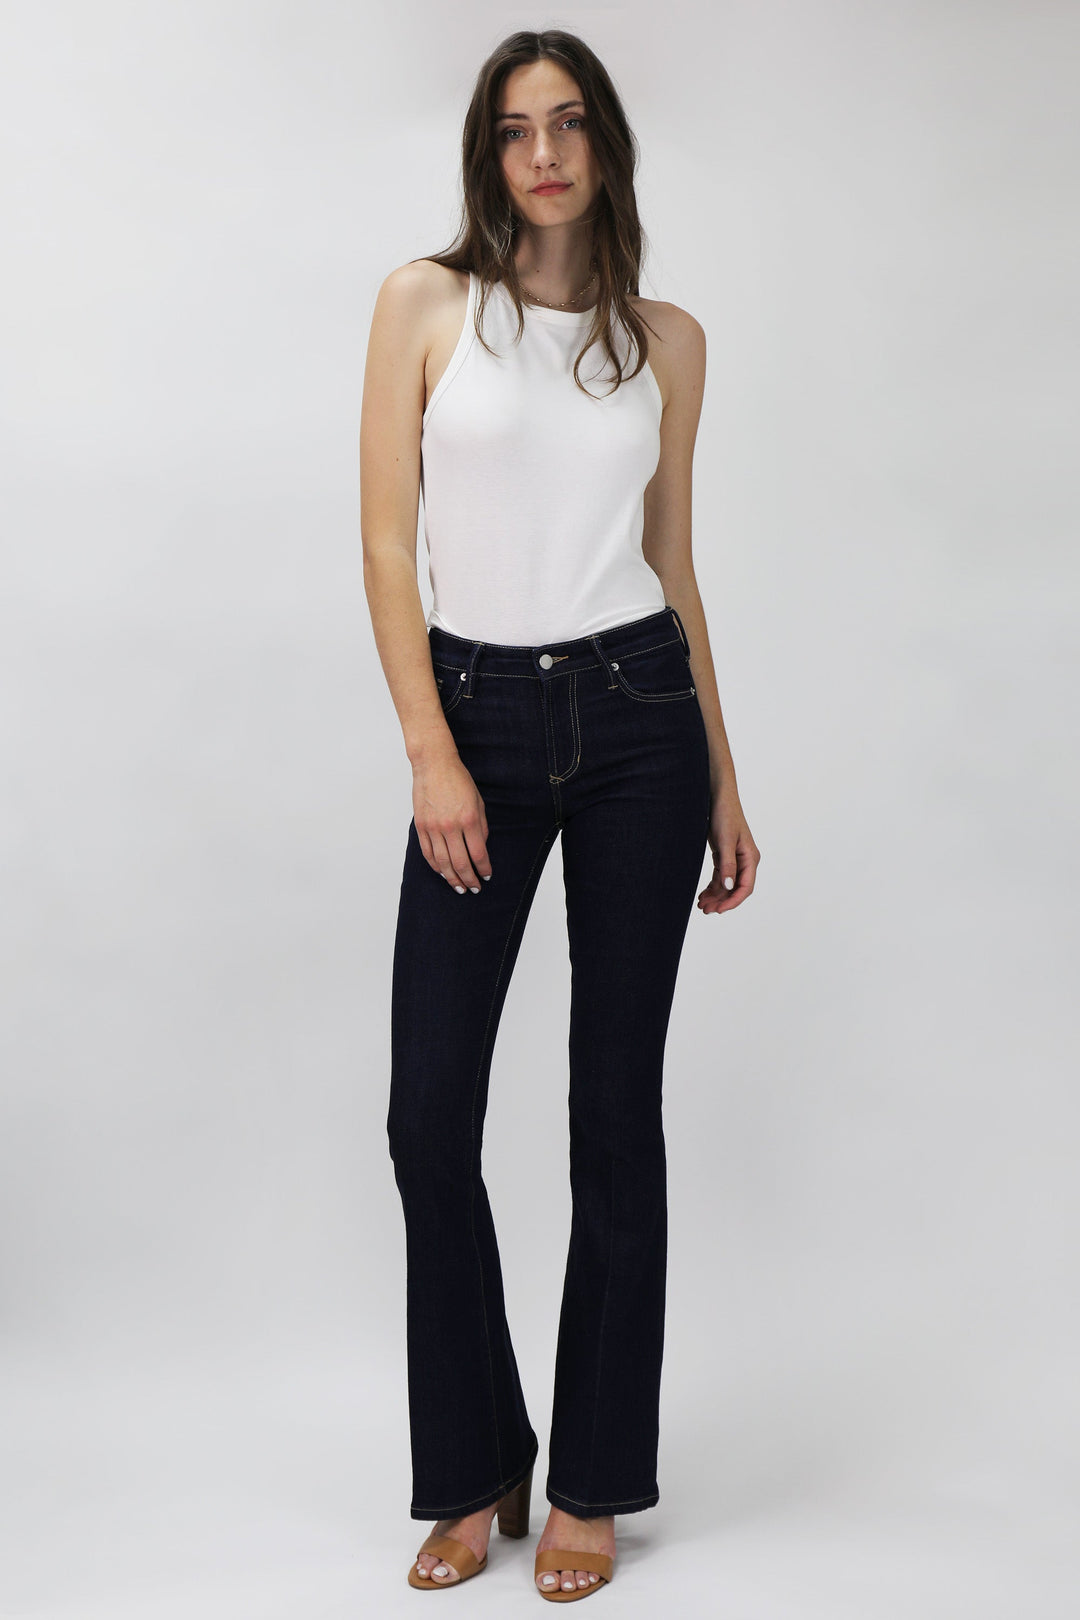 image of a female model wearing a rosa high rise flare leg jeans breakwater JEANS